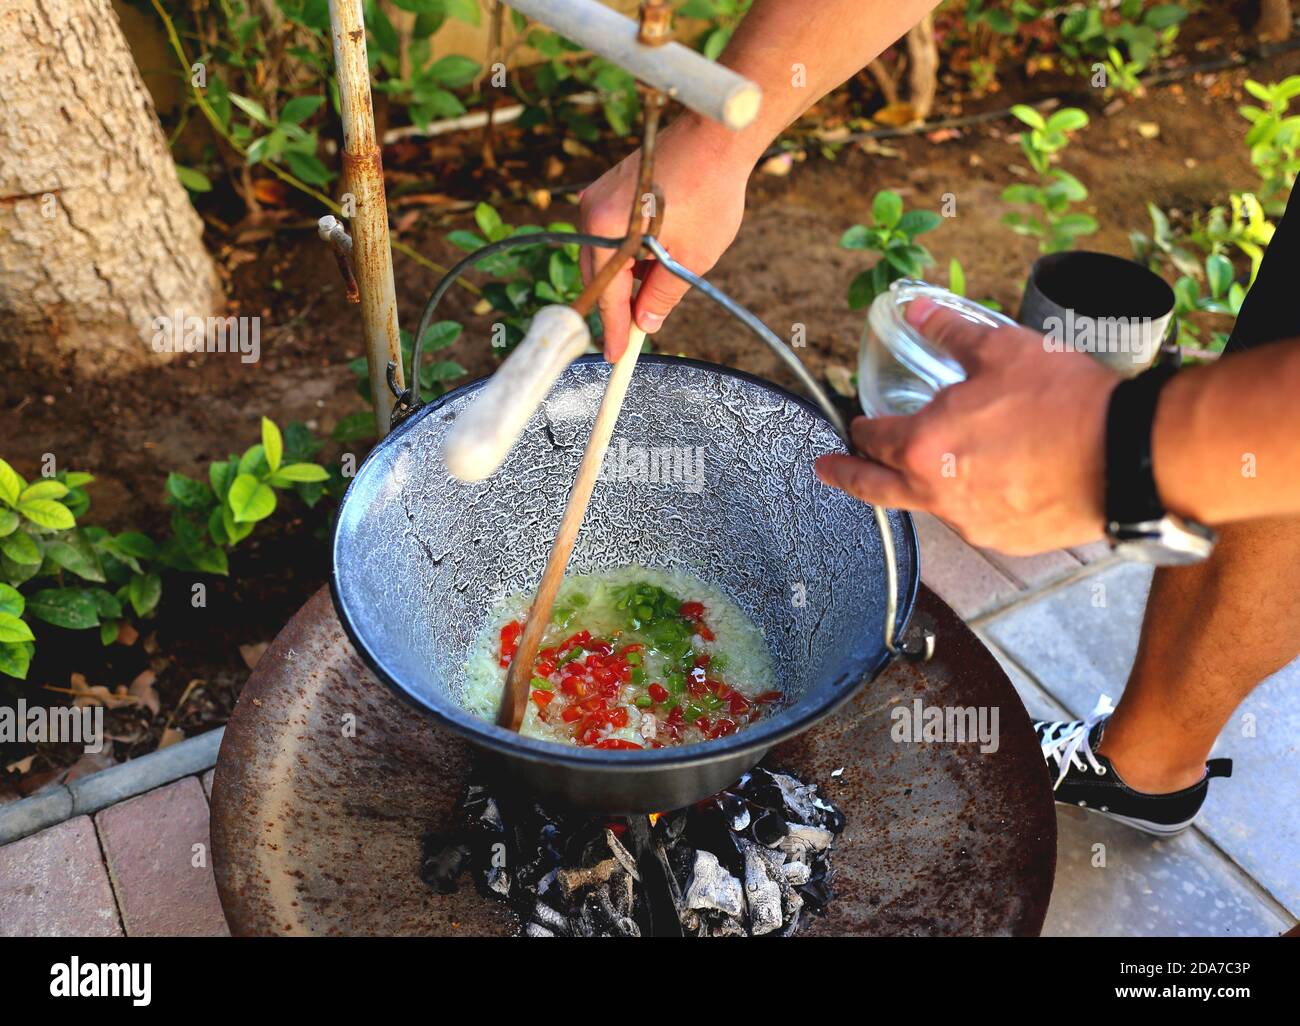 Making Hungarian gulyas leves, goulash, in a cauldron, bogracs, in the garden - cooking the onions and peppers Stock Photo